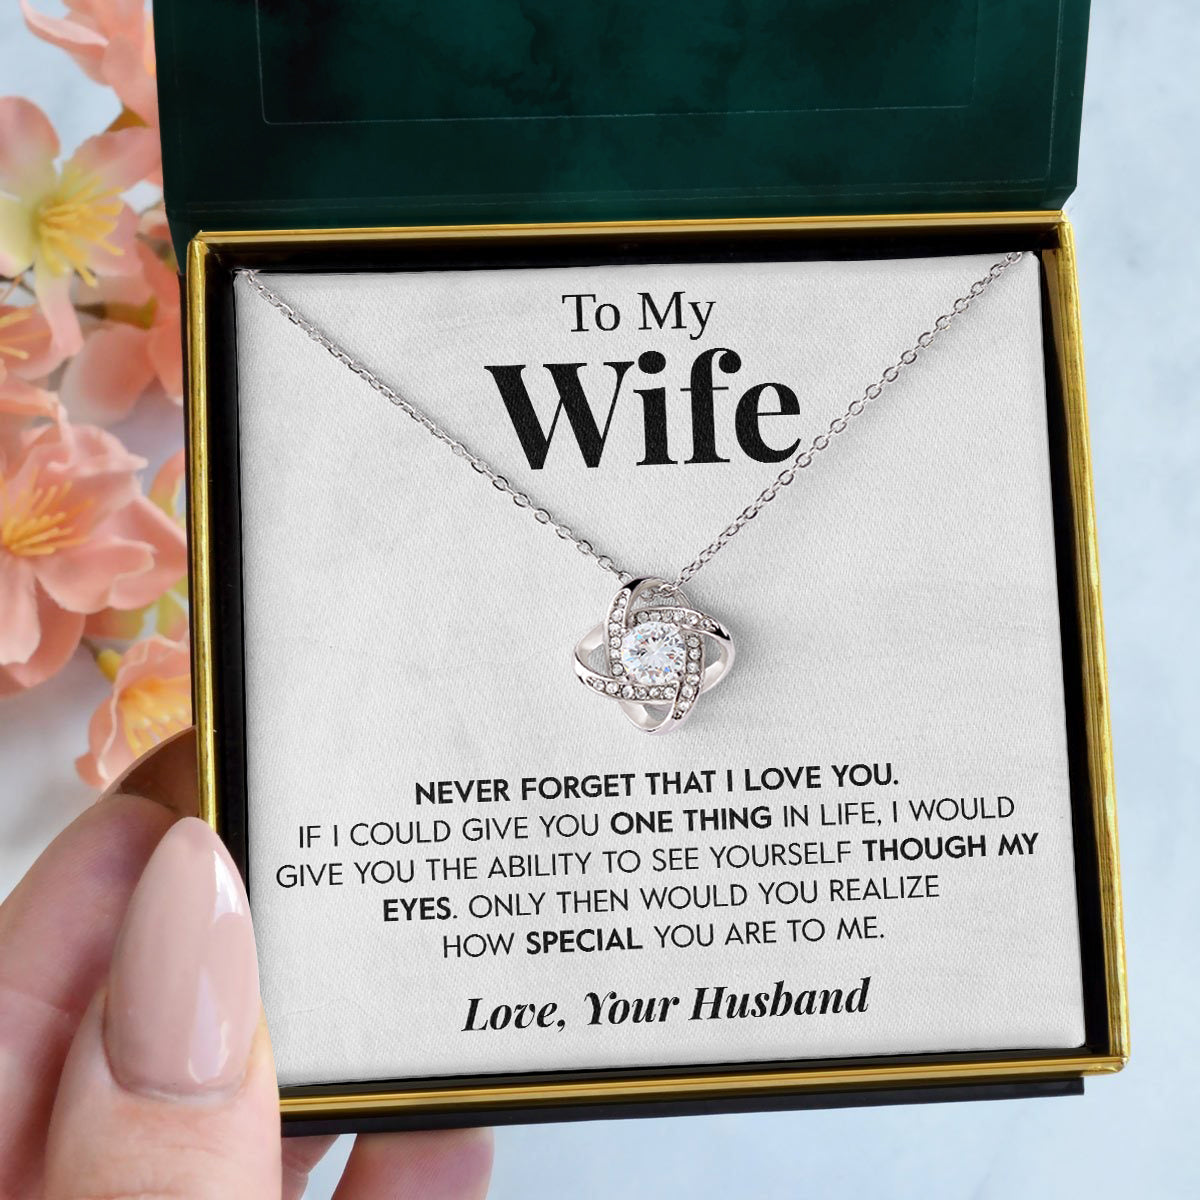 To My Wife | "Never Forget" | Love Knot Necklace